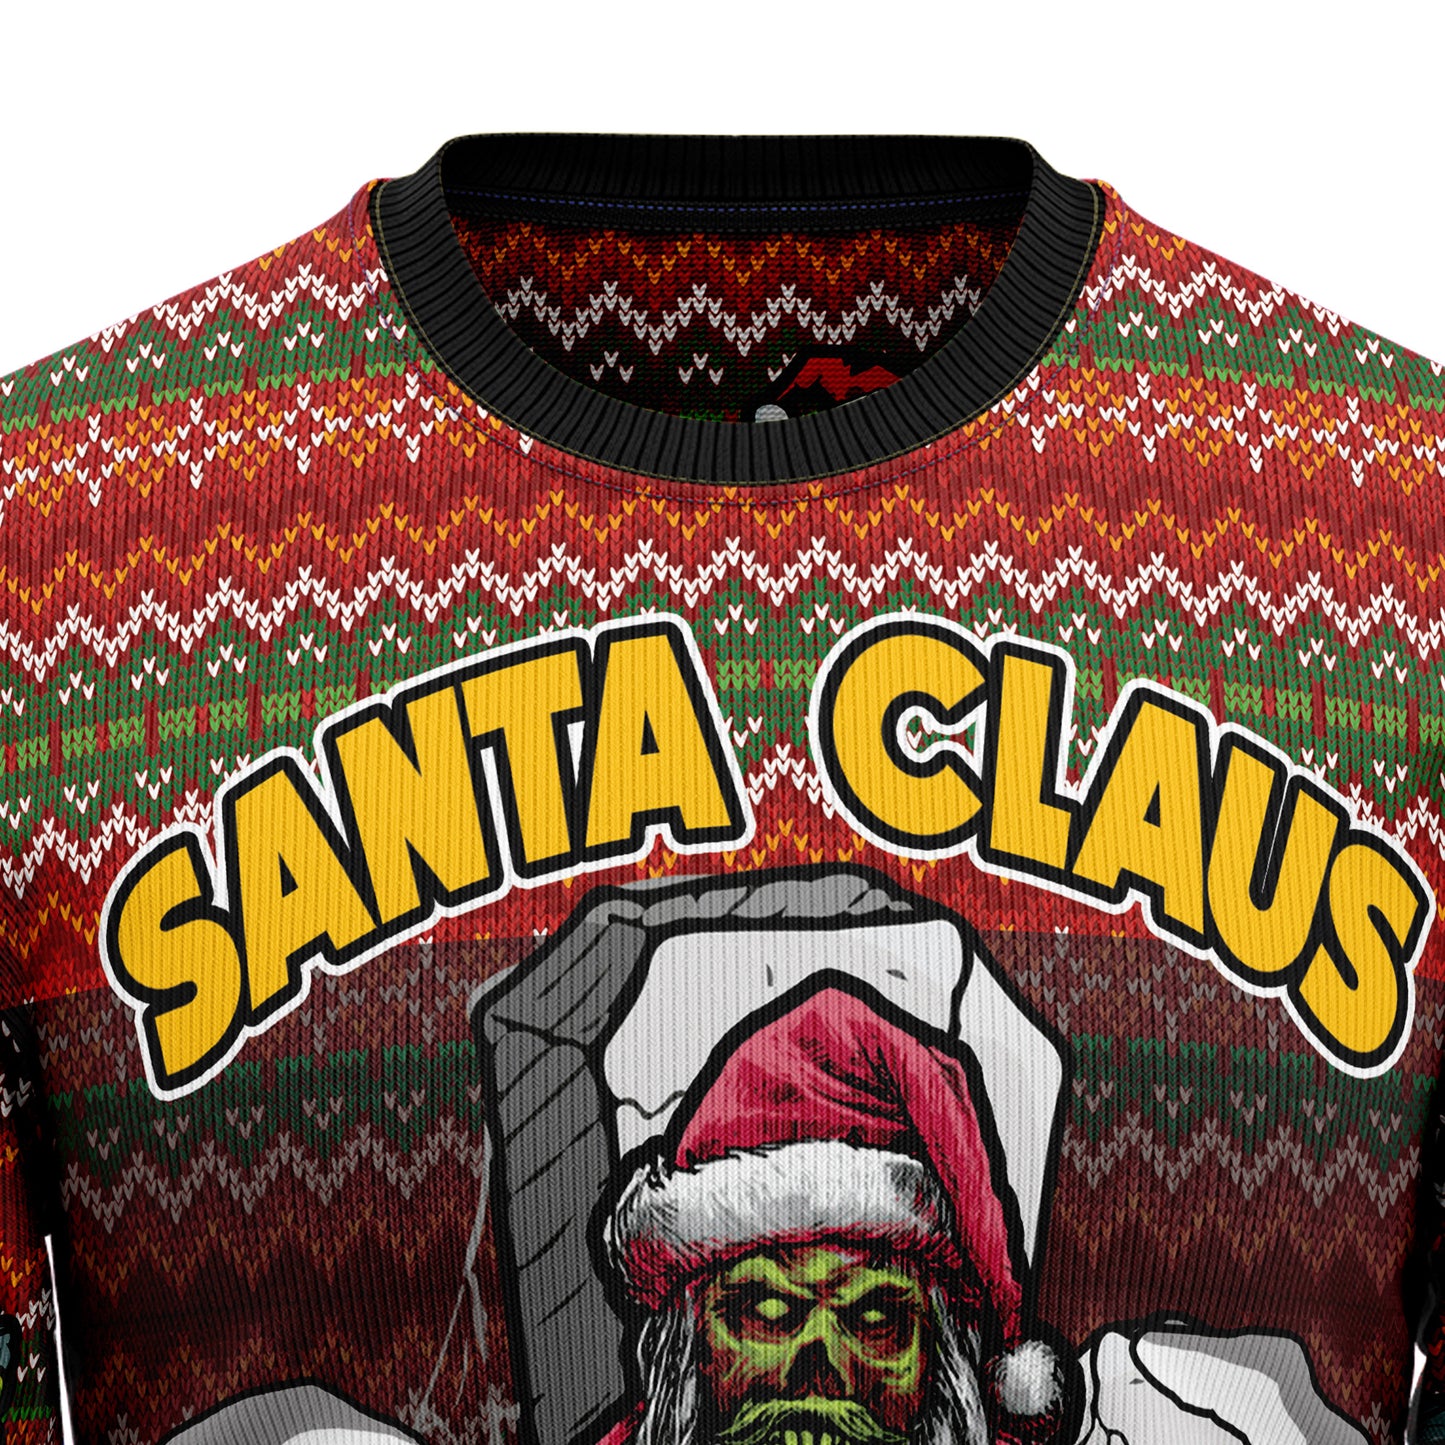 Santa Claus Zombie Because You Stopped Believing HT100908 Ugly Sweater